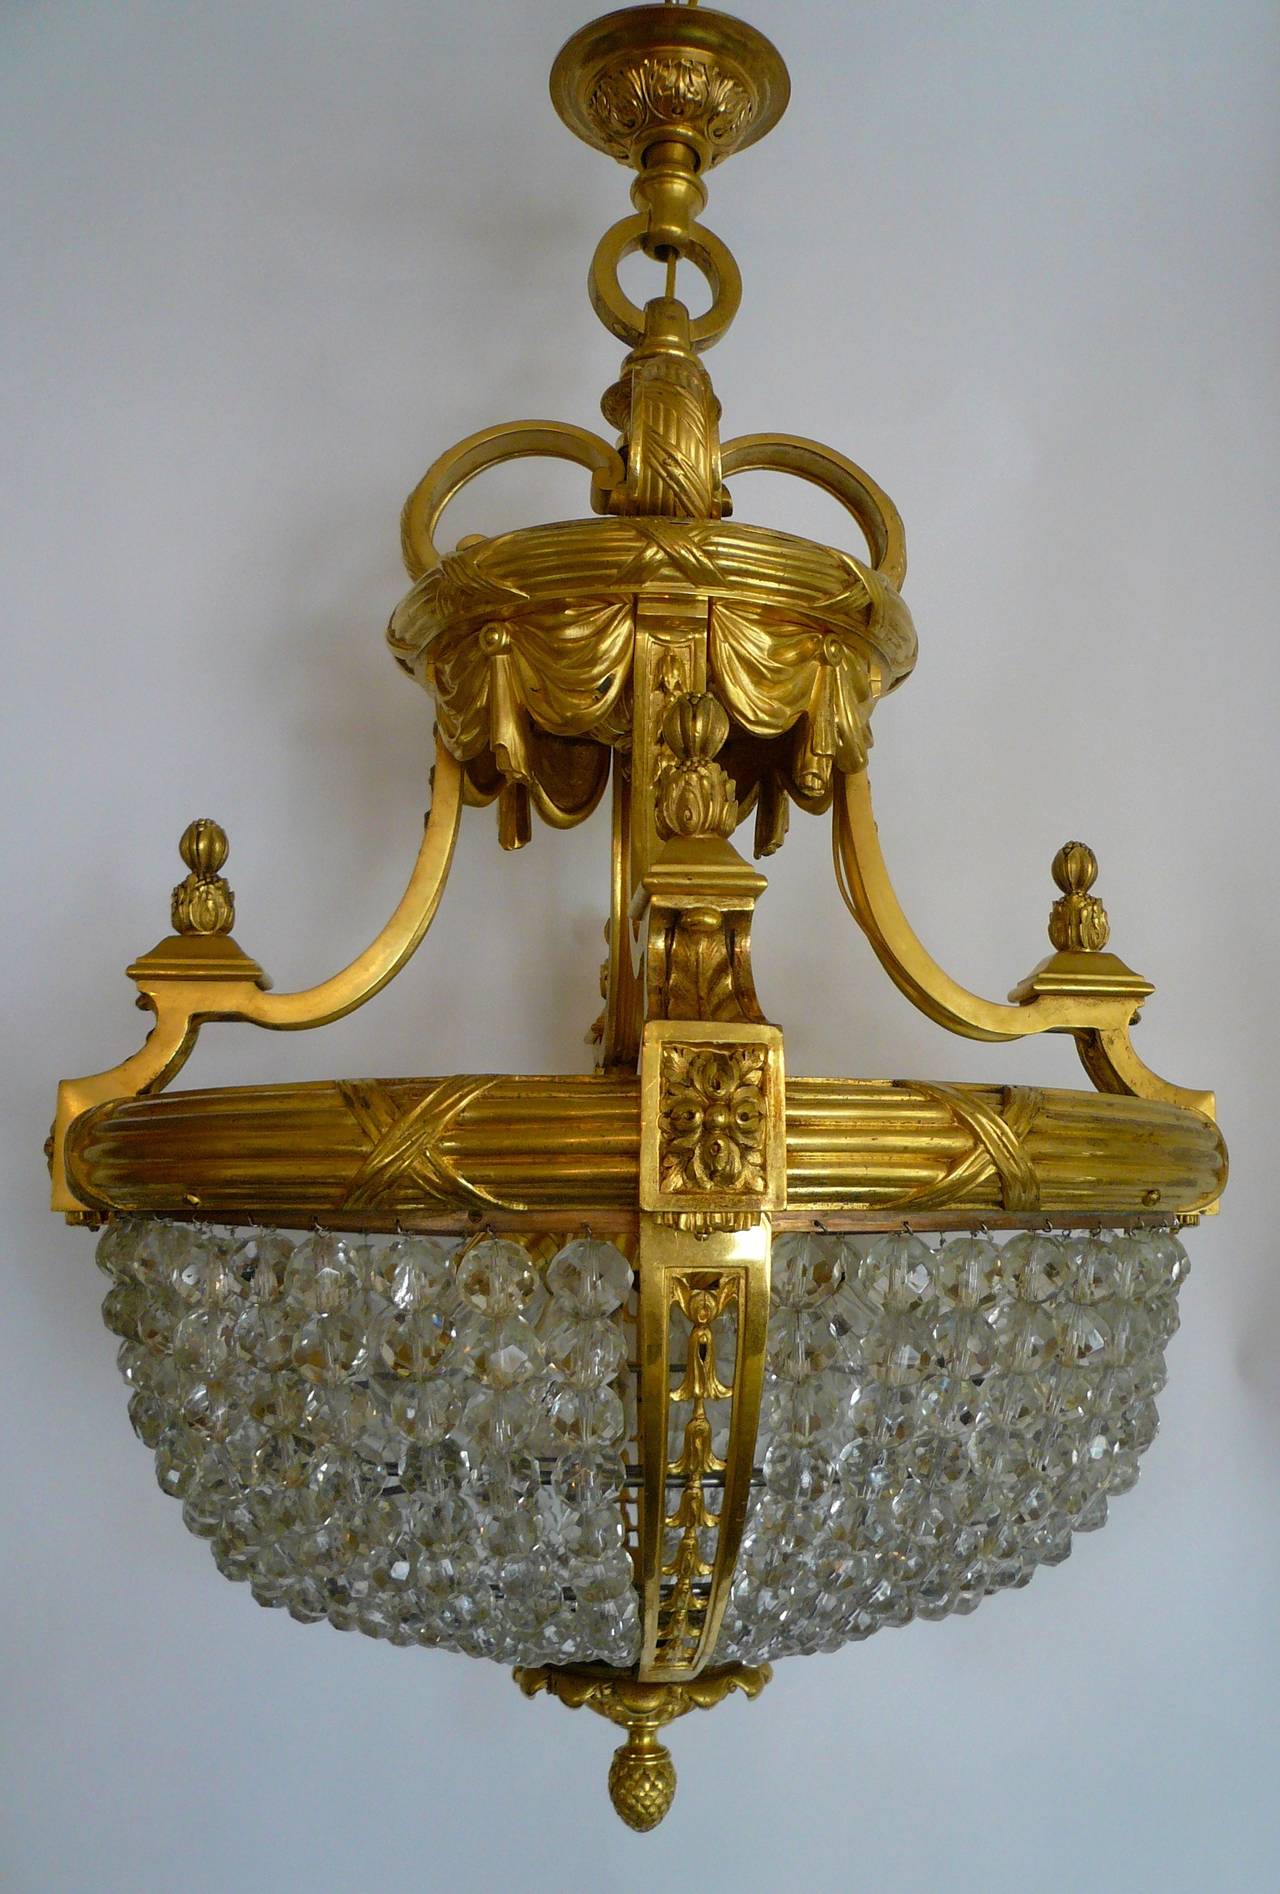 With great detail and finish, this gilt bronze fixture by Edward F. Caldwell is strung with faceted crystal beads, and has six lights.